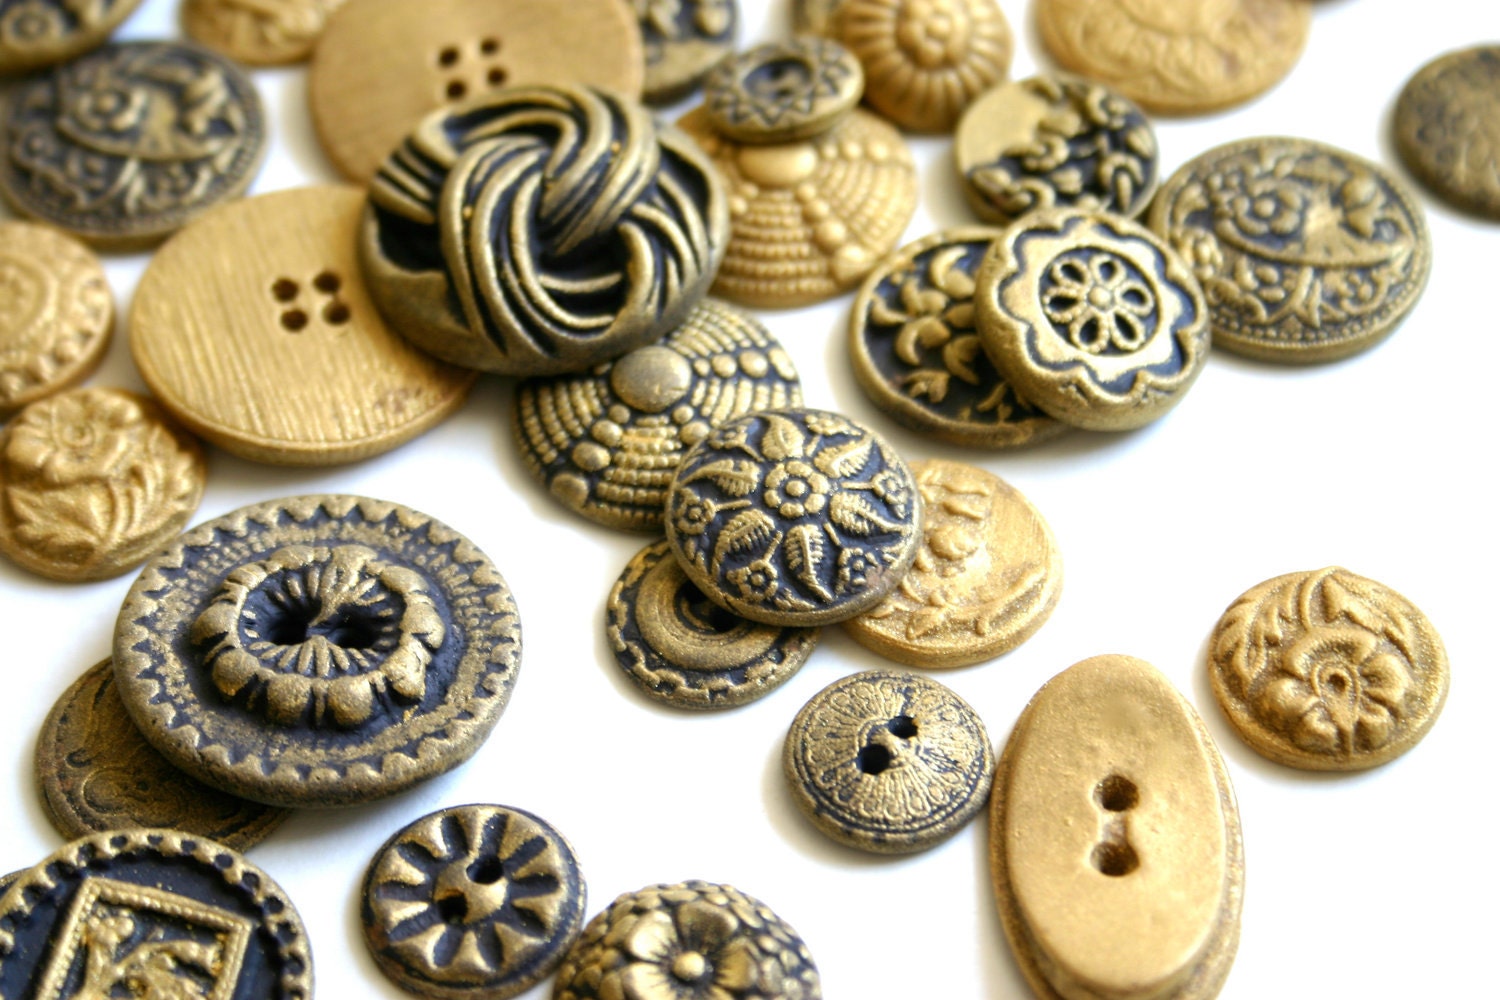 Edible Chocolate Candy Brass Buttons (Antique Inspired) 100 Cake Decoration - Wedding Favor - Etsy Weddings